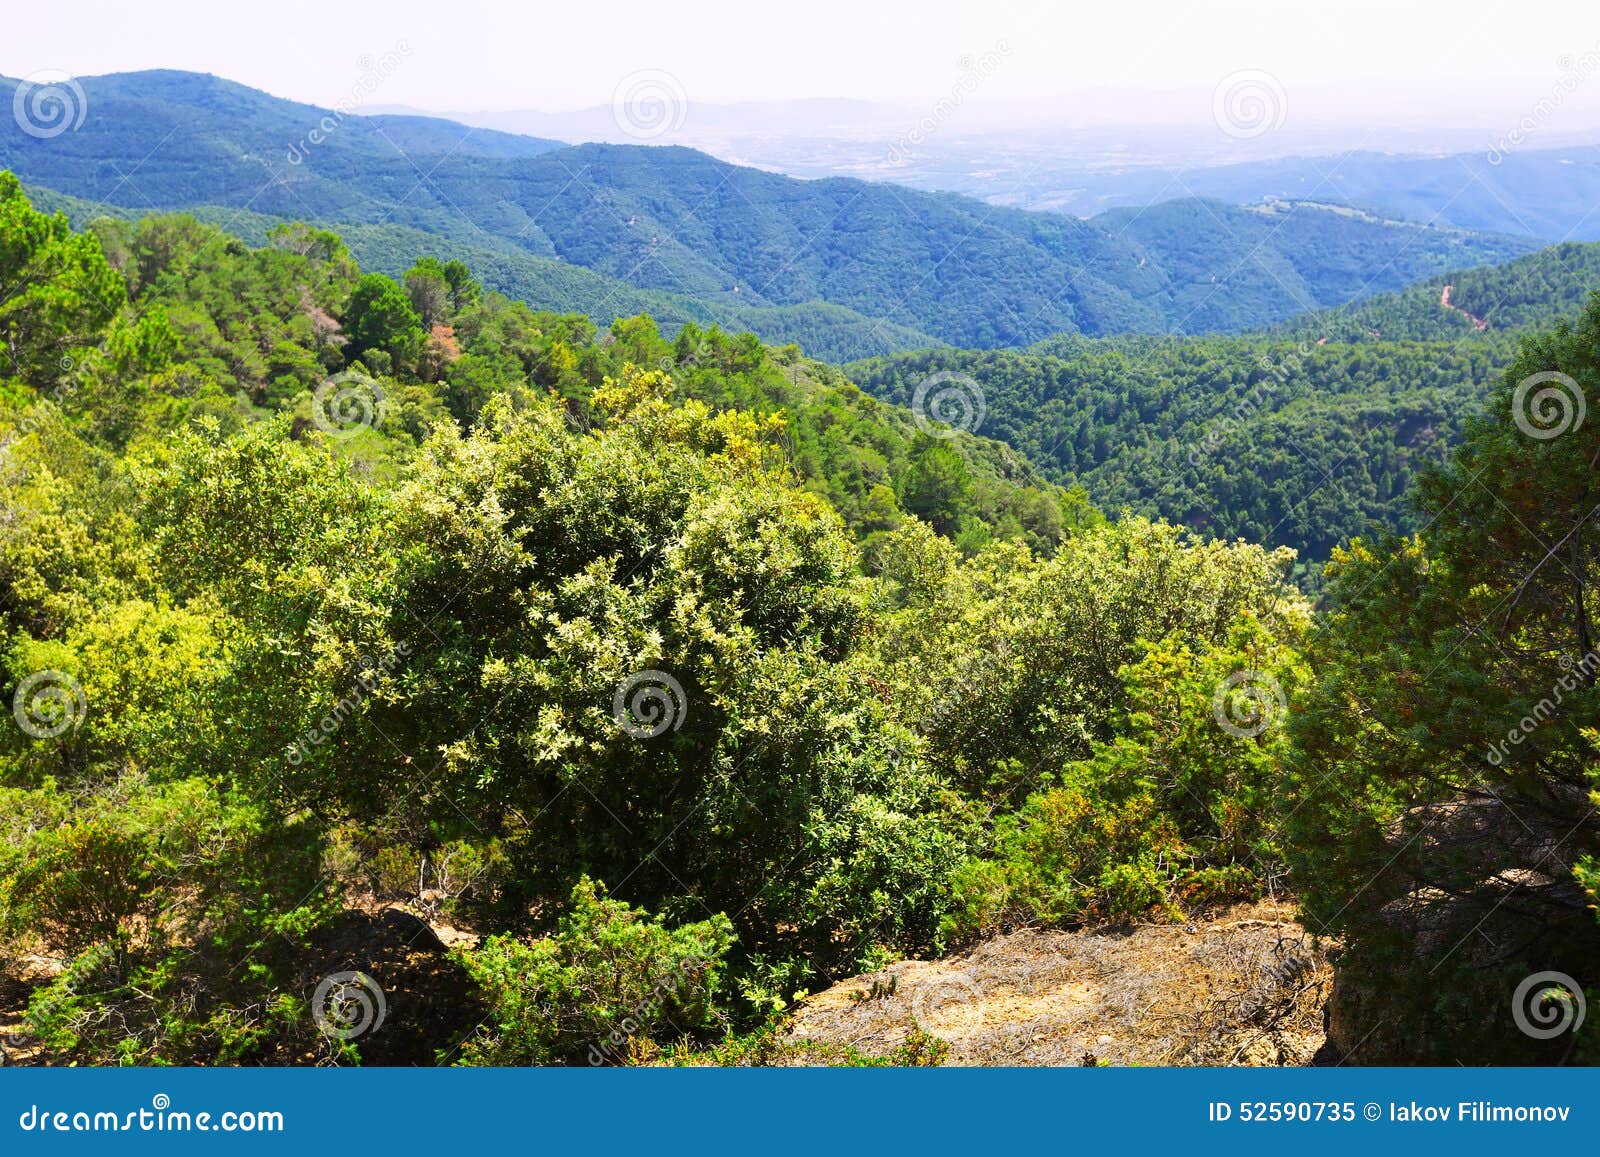 general view of montseny. catalonia